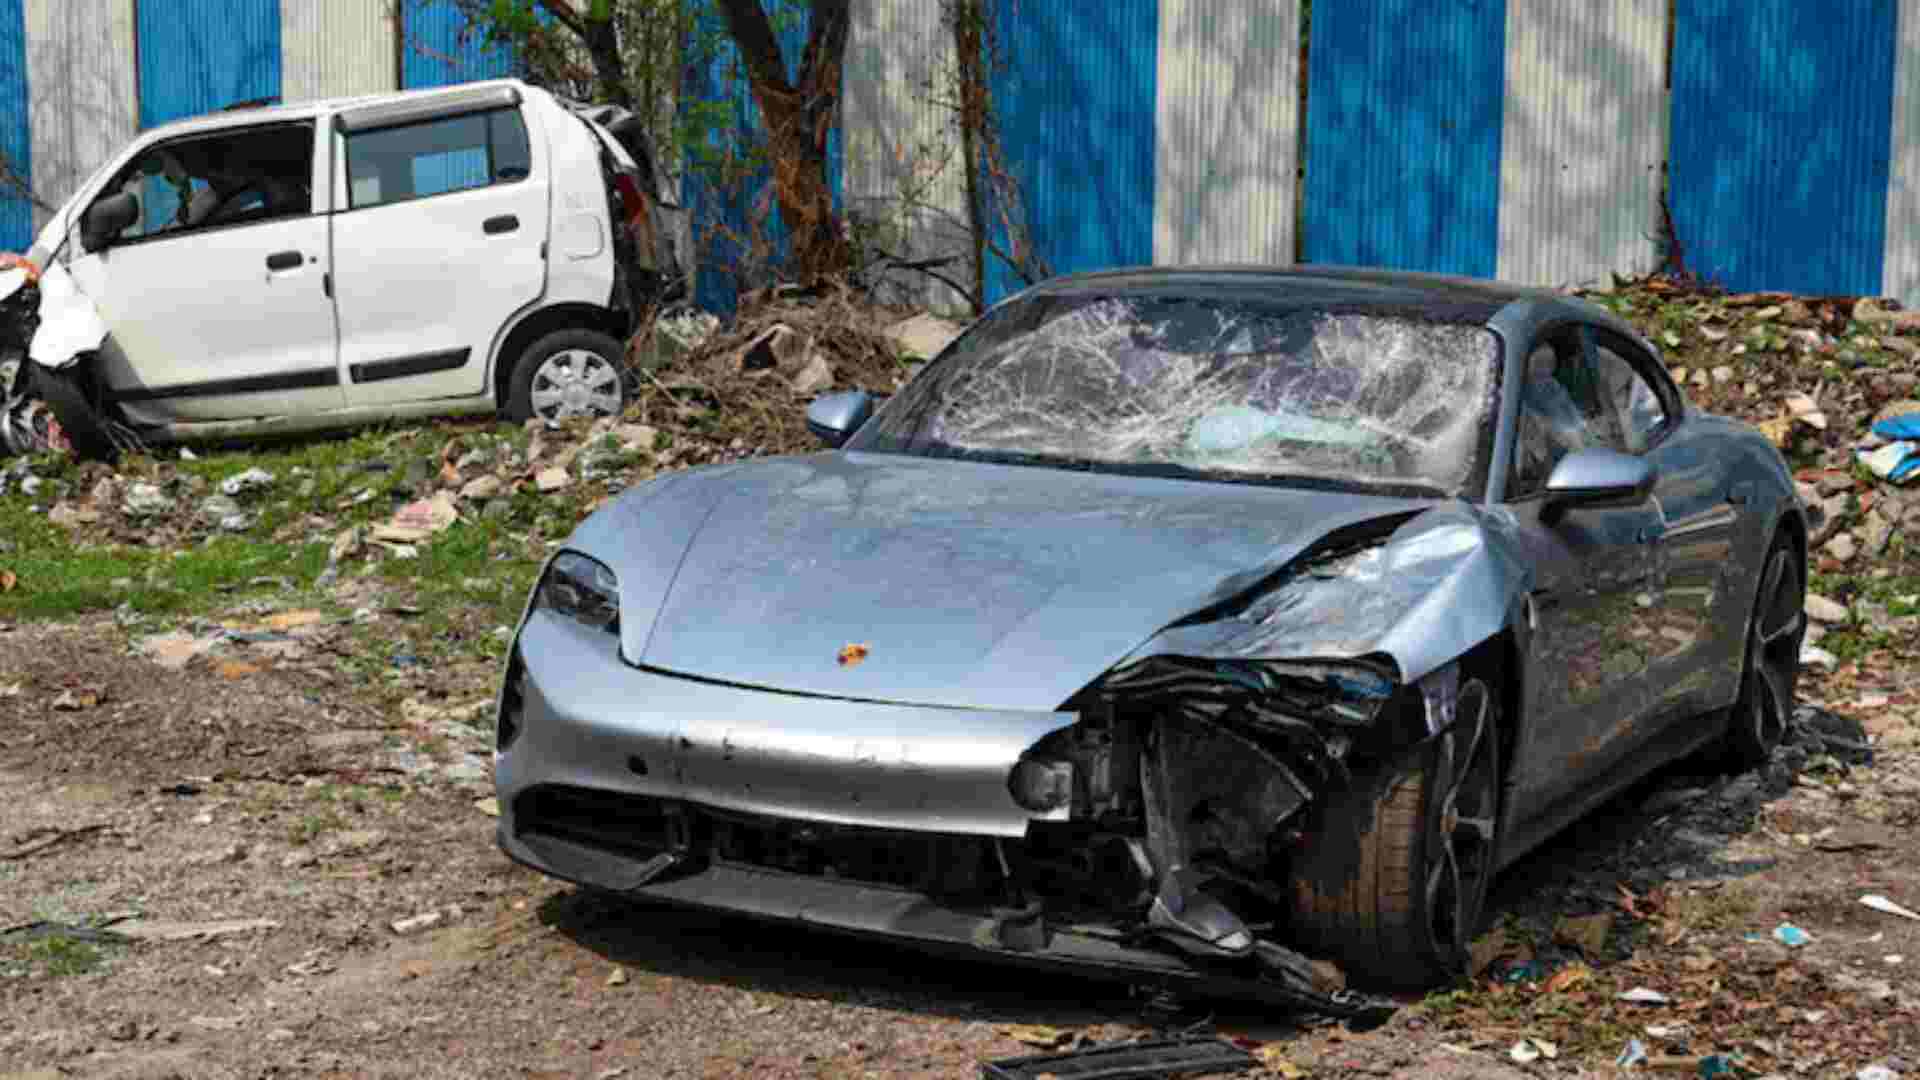 Pune Porsche Accident: New Twist as Police Investigate Alleged Preferential Treatment with Pizza and Burgers